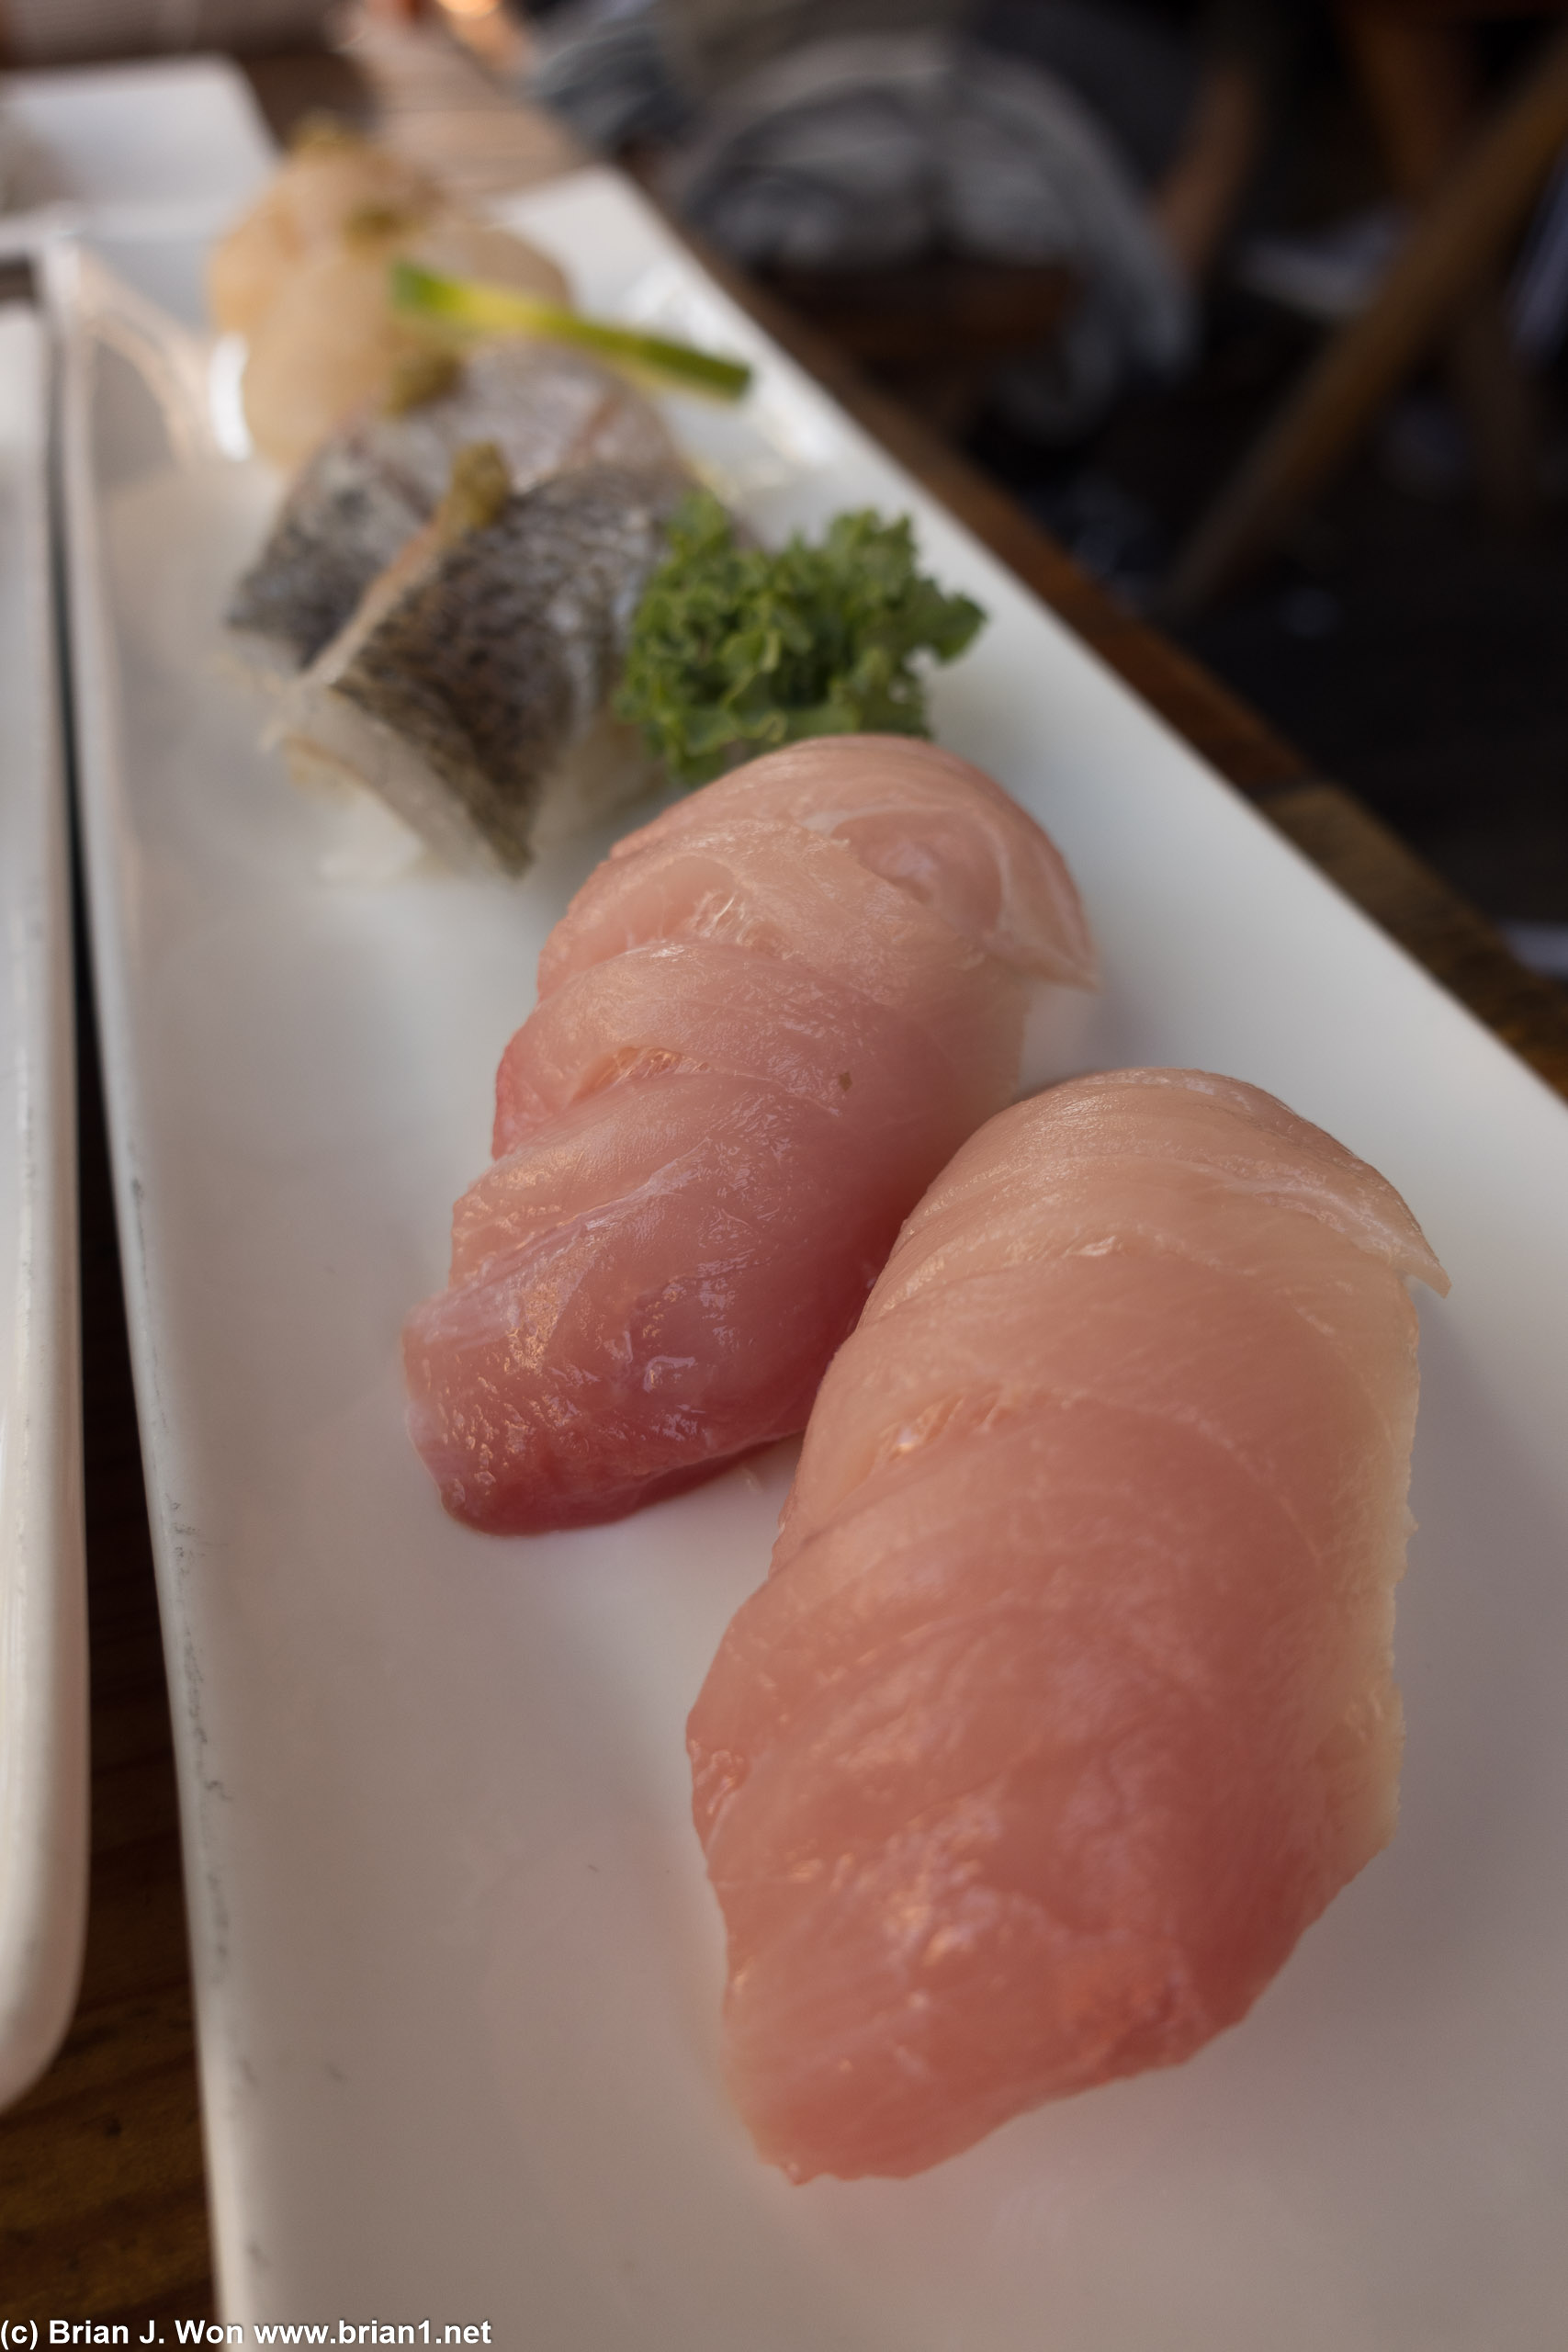 Hamachi (yellowtail) in the front.